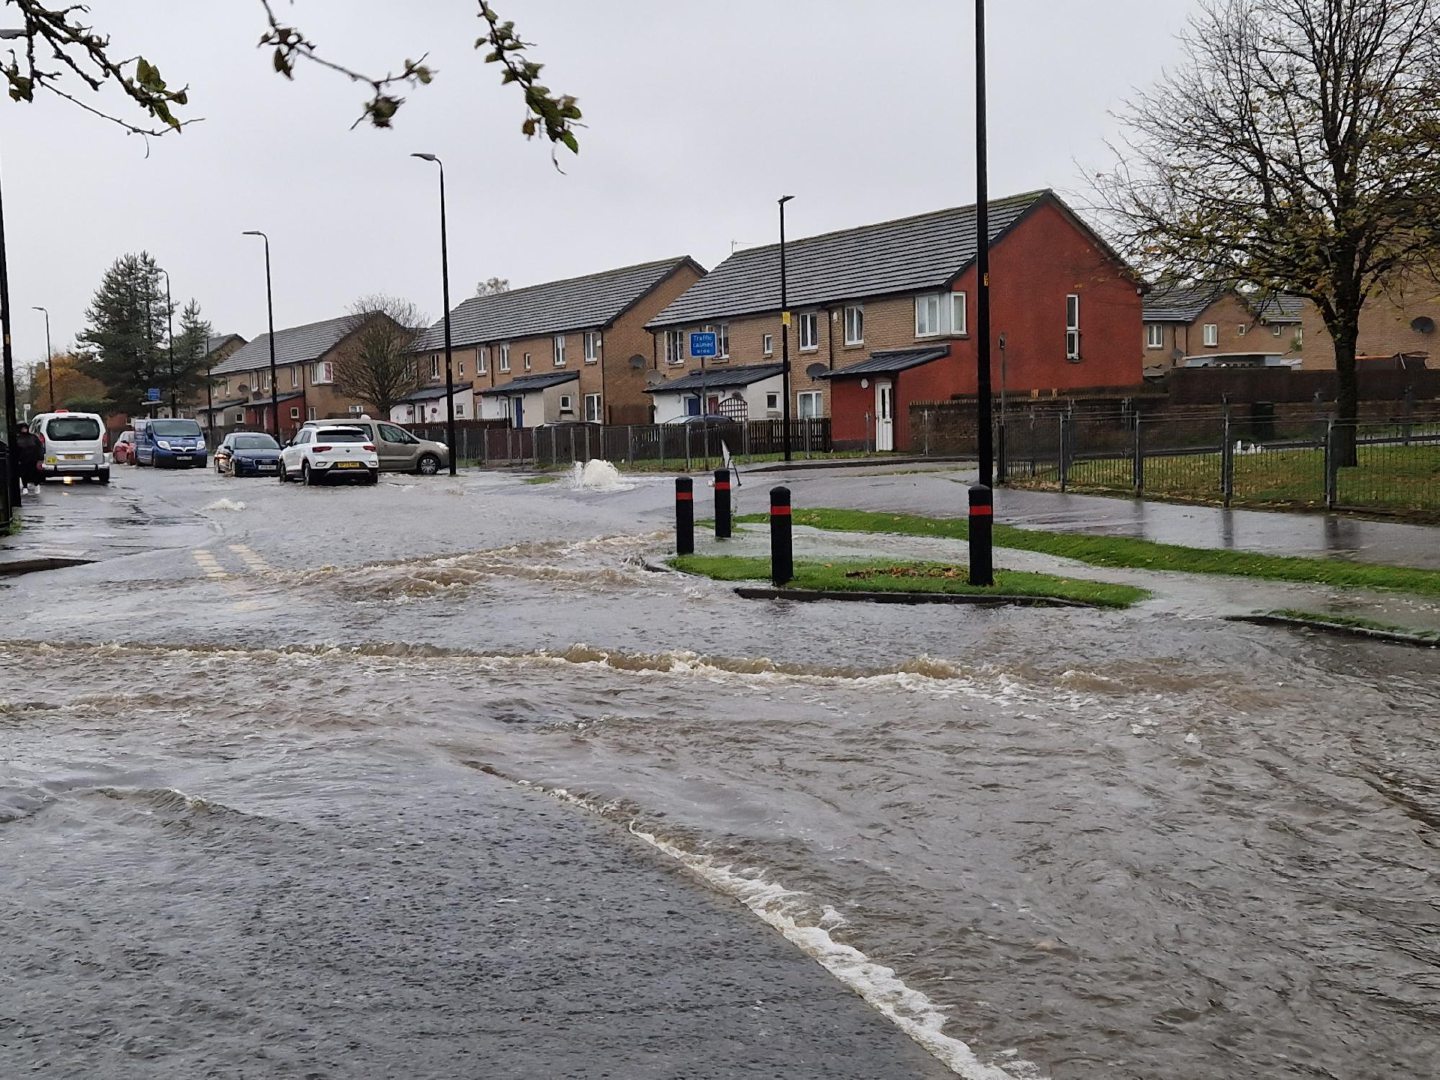 Flooding with overflowing gutter in the Ardler area of Dundee during Storm Babet.